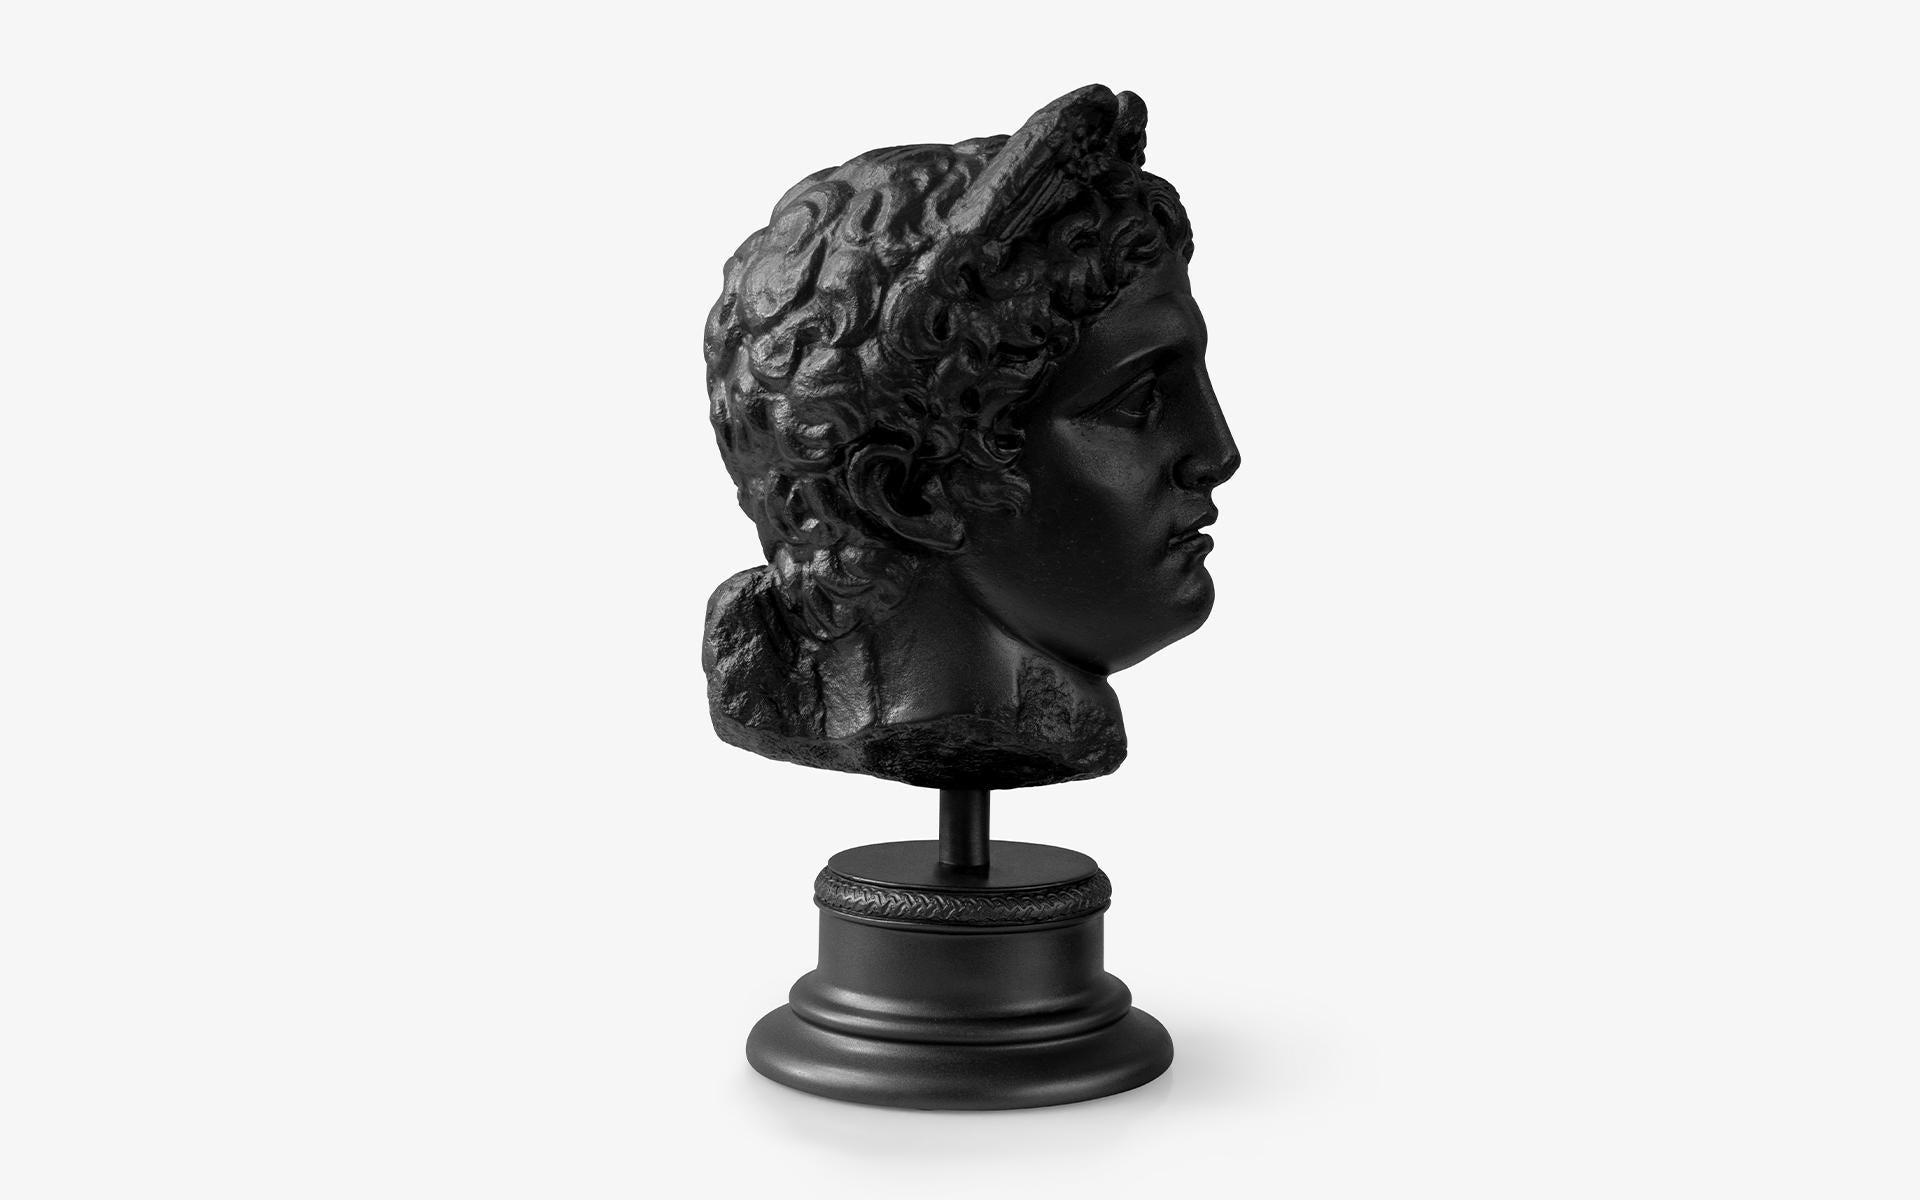 Turkish Black Mercurius Hermes Bust Statue Made with Compressed Marble Powder